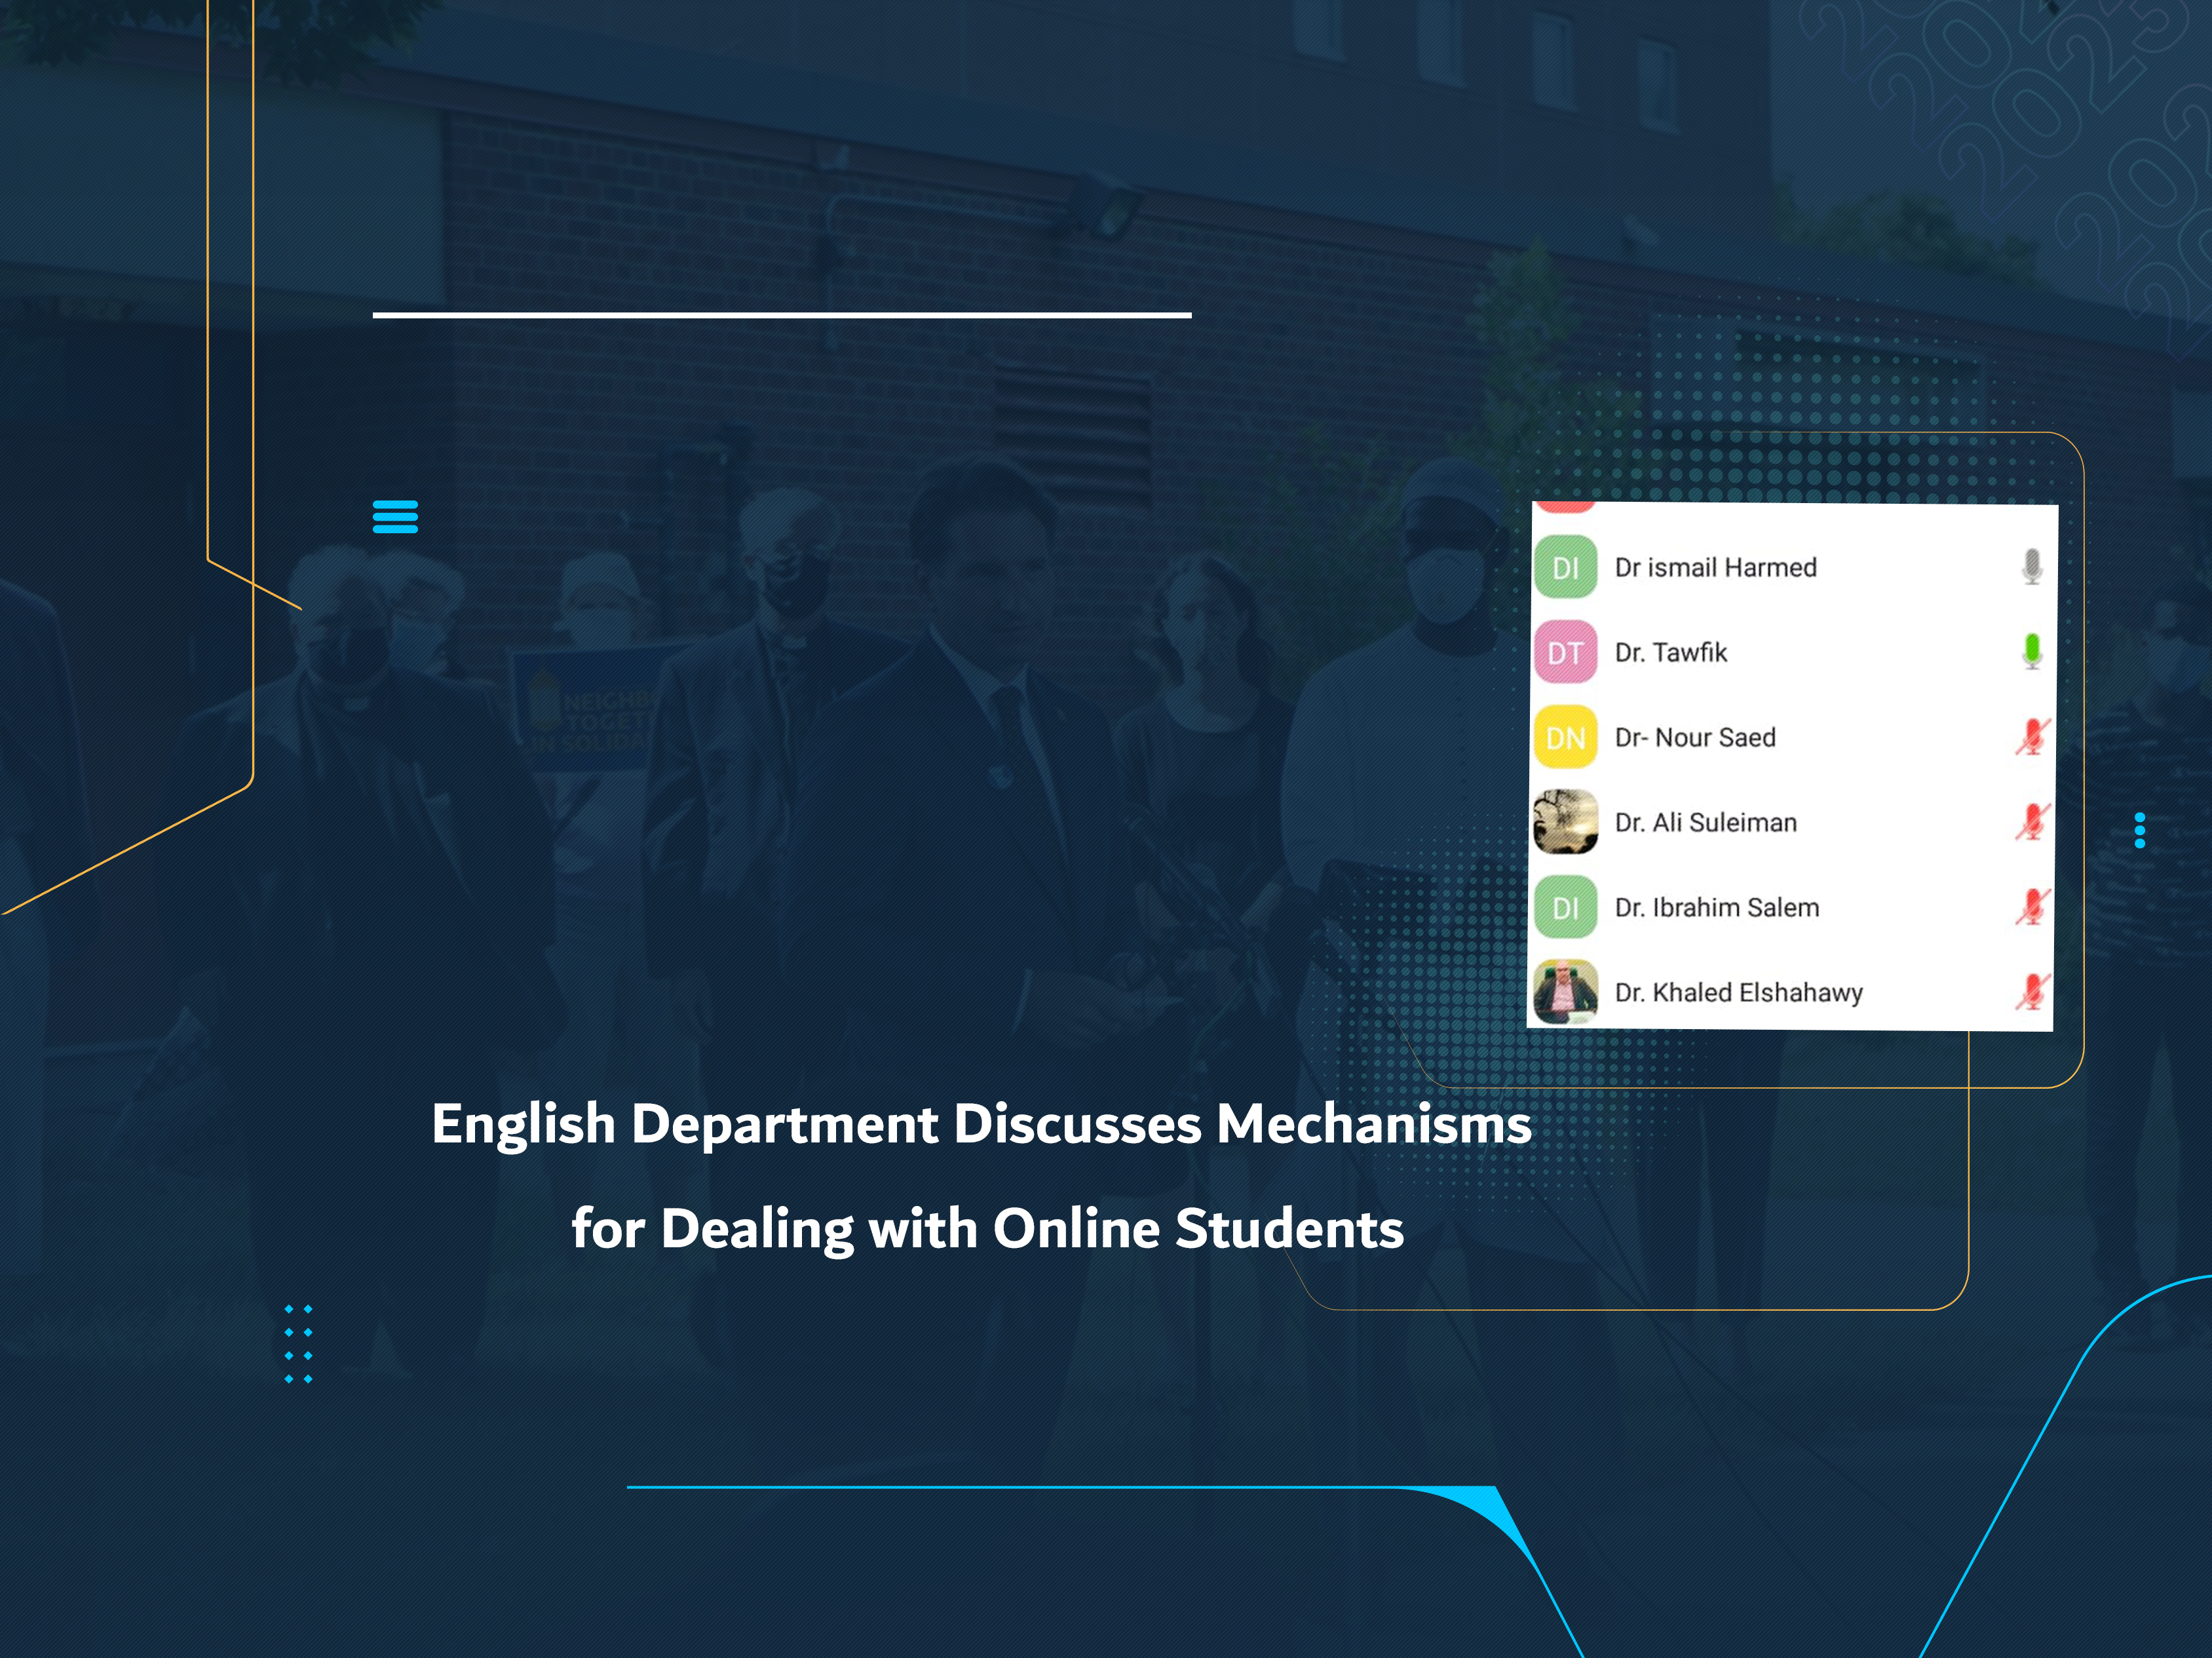 English Department Discusses Mechanisms for Dealing with Online Students